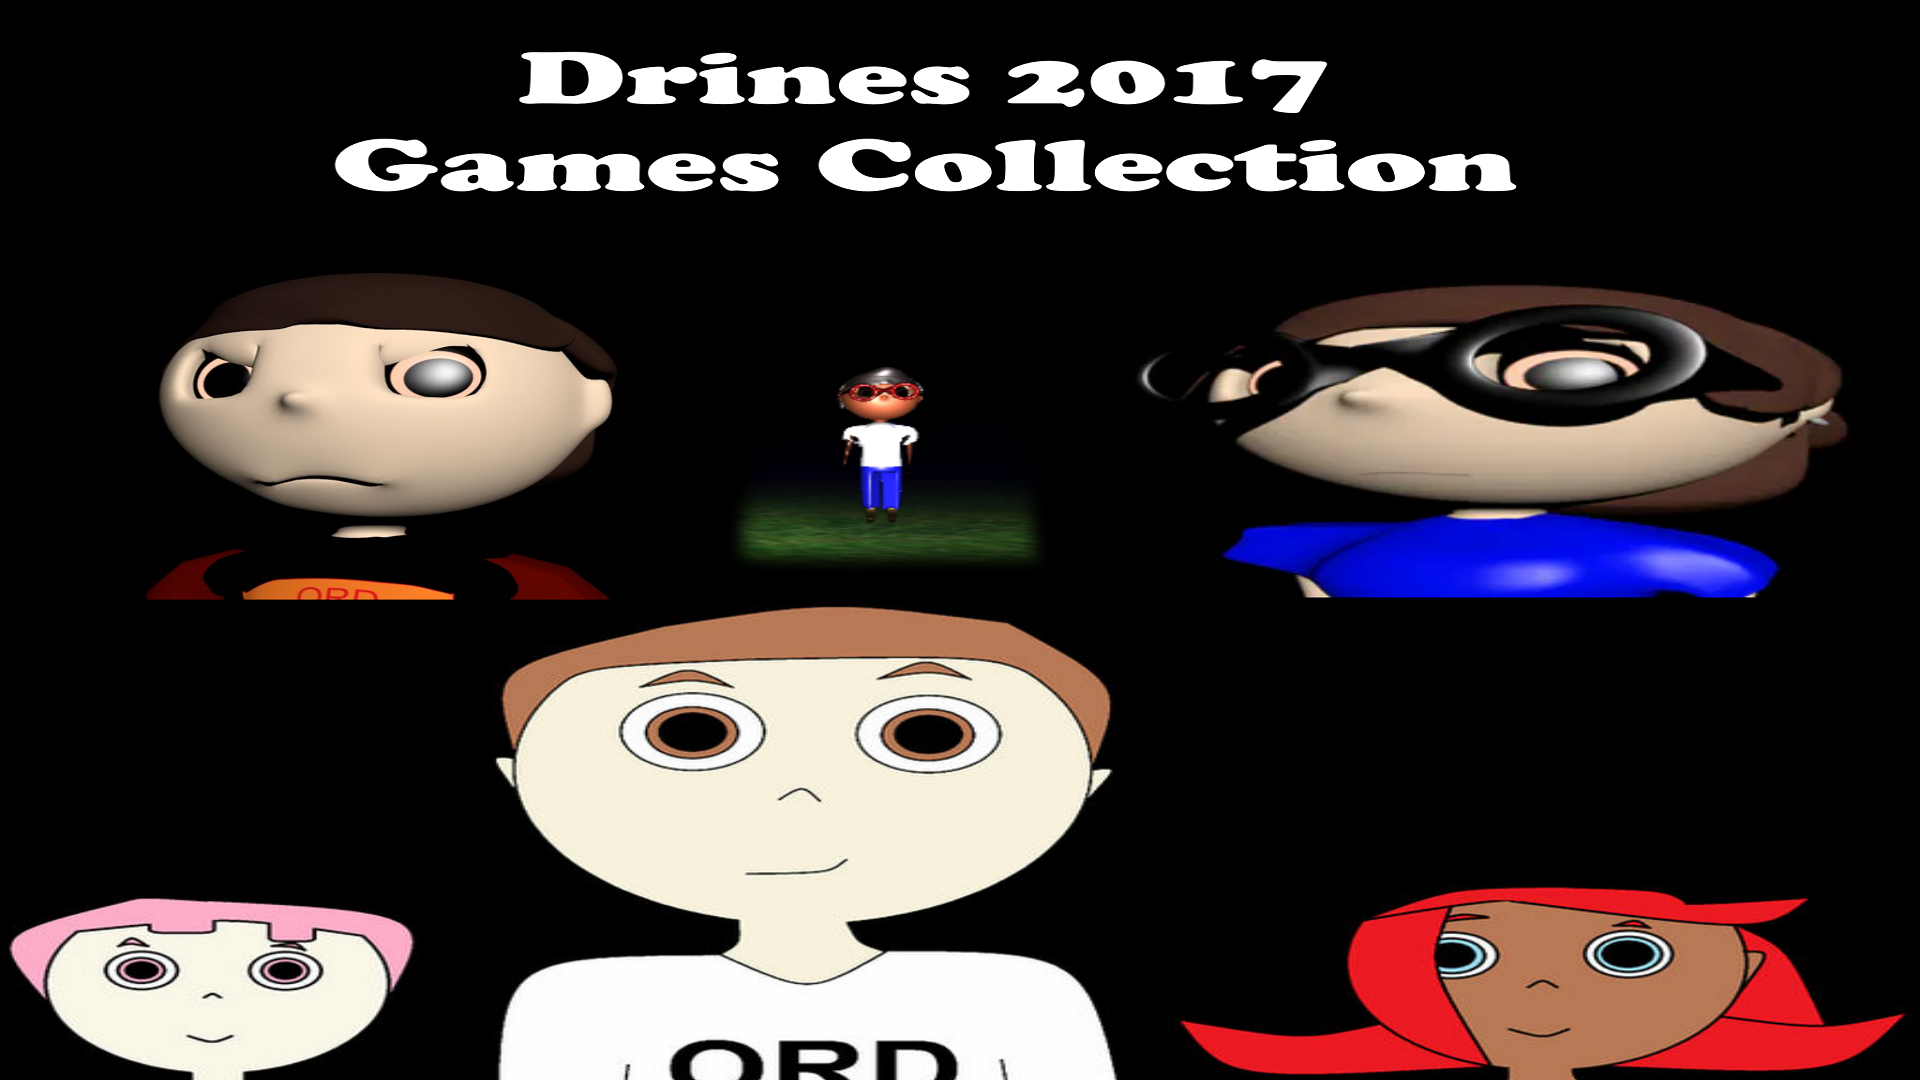 Drines 2017 Games Collection